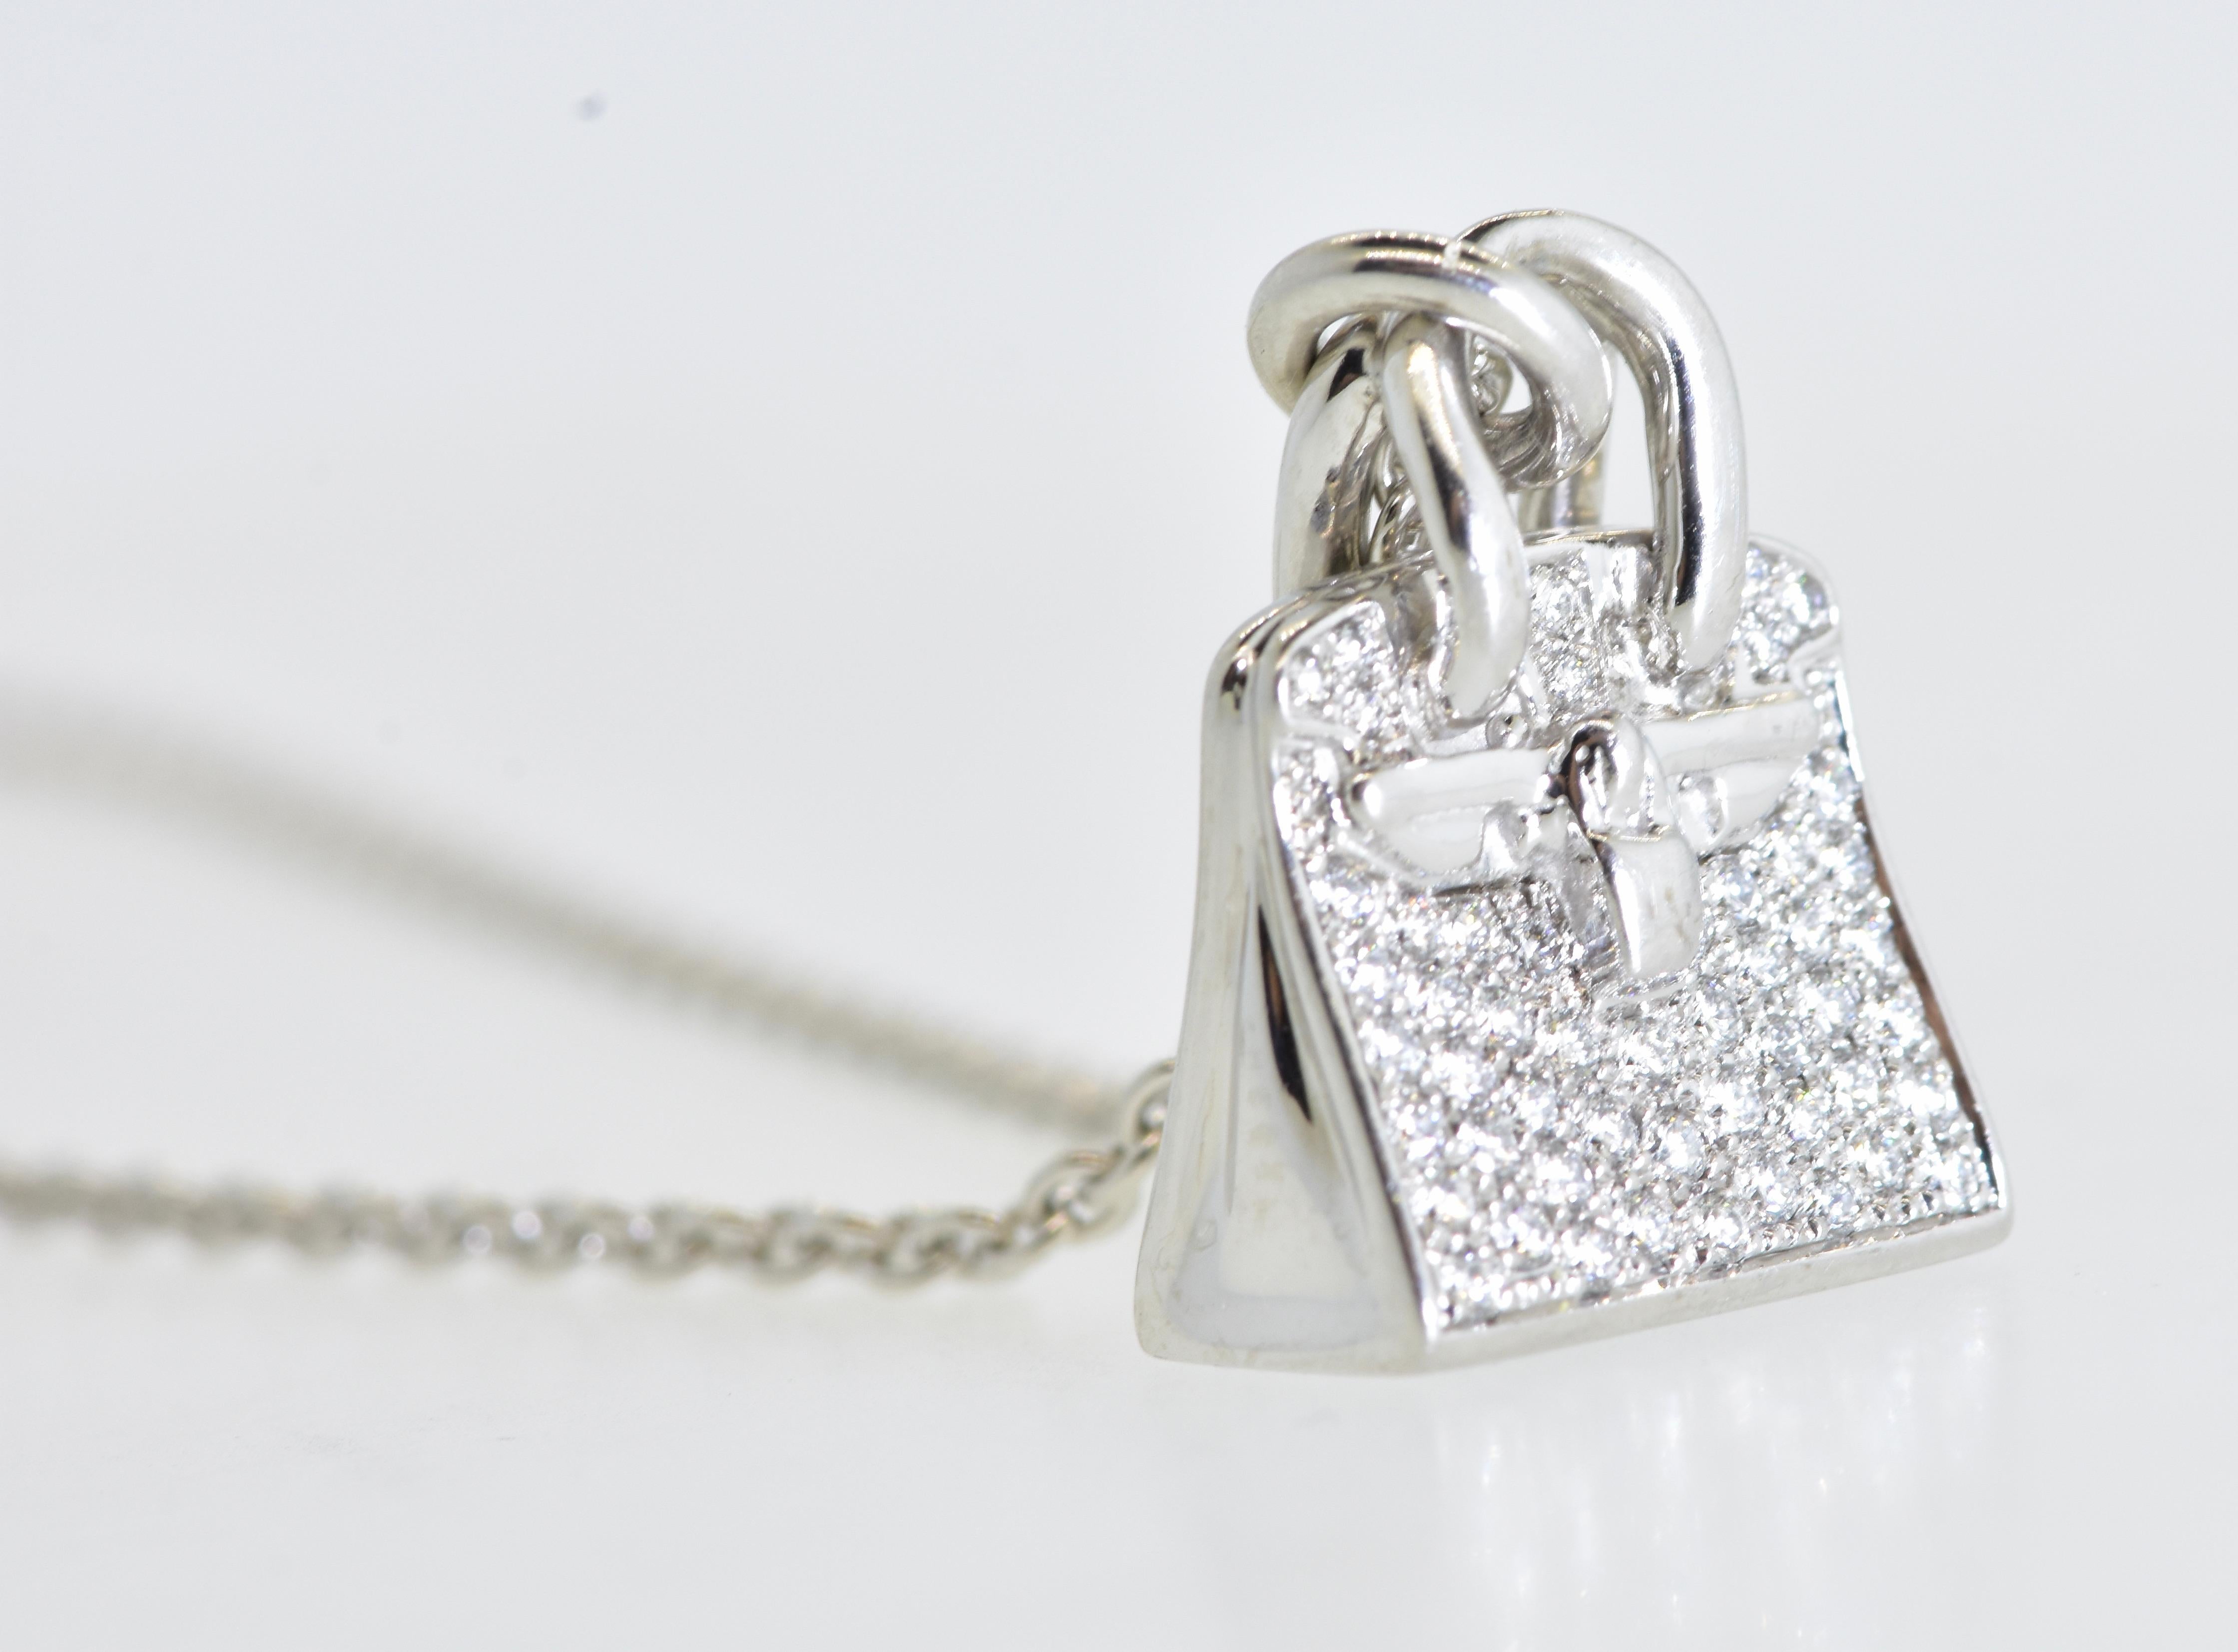 Hermes diamond and 18K white gold Birkin Amulette pendant necklace with 51 well cut and well matched brilliant cut diamonds all near colorless (G), and very slightly included, amounting to a diamond weight of .22 cts.  This piece is signed Hermes,